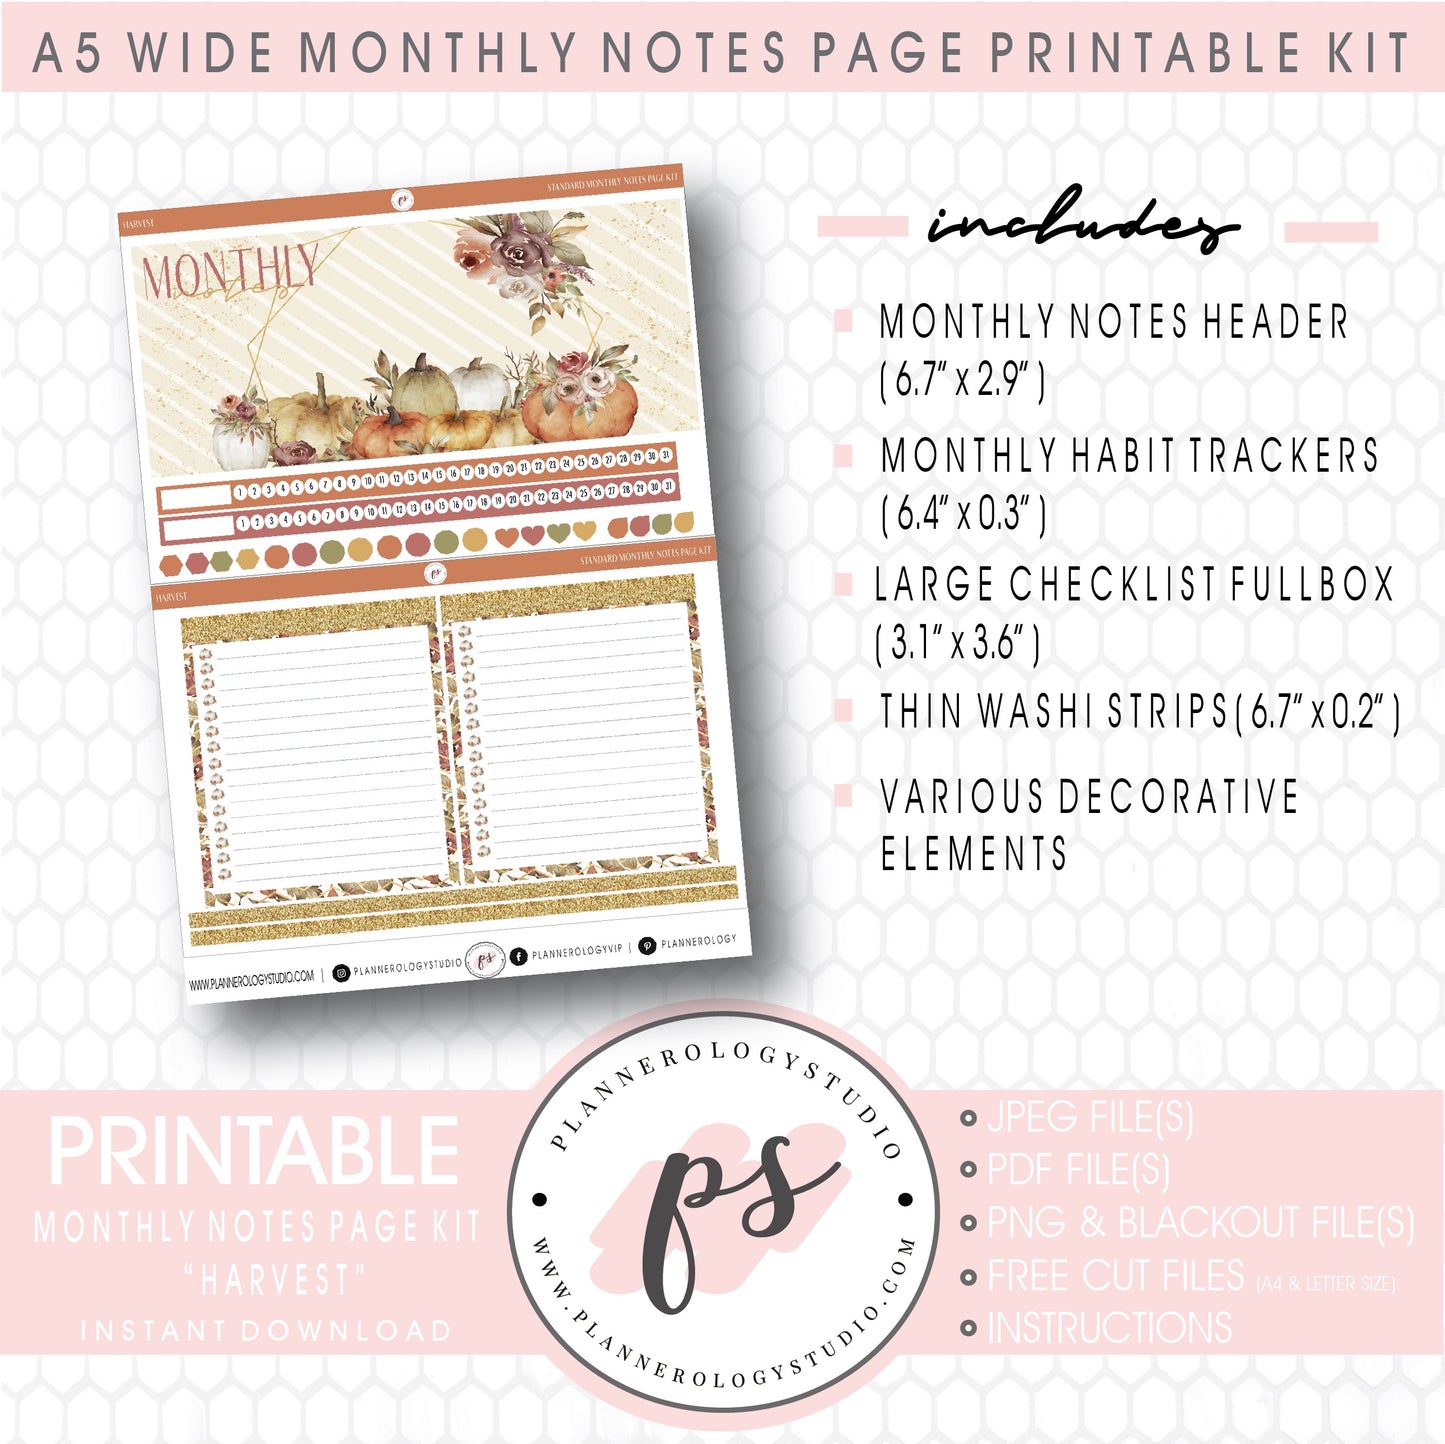 Harvest Monthly Notes Page Kit Digital Printable Planner Stickers (for use with Standard A5 Wide Planners)